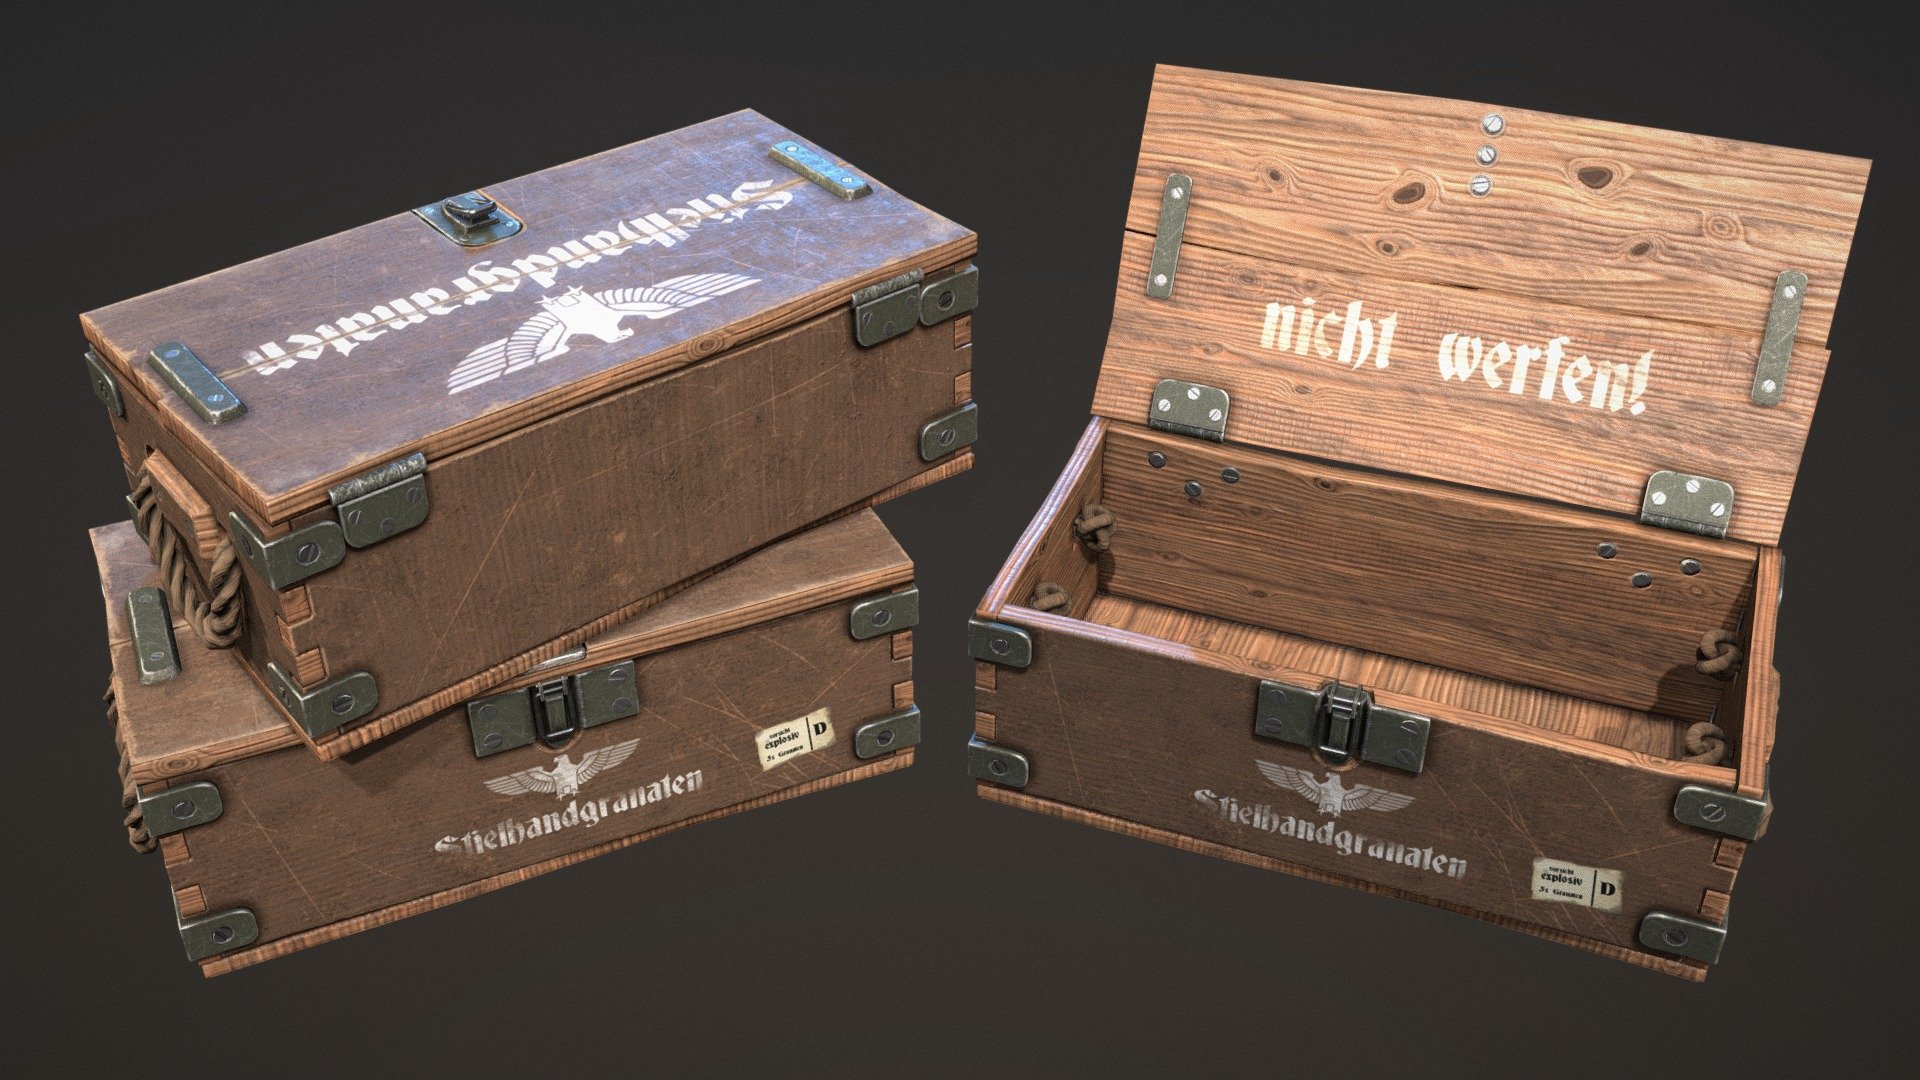 Main
WWII Crate Box
VR game ready mesh and textures. 
High resolution textures out of Substance Painter.

Texture
PBR 4k textures in .tga format.
Unreal Metalness: BaseColor, Normal, Occl/Rough/Metal 
Unity Metallic: Albedo/Transp, Normal, Metallic/Smooth

Mesh
Mesh has 15.840 tris and is ready for rigging and import.
.ma/.fbx/.obj

General Information
This asset is best used for VR experience due to it´s high details.
All parts which can move are seperate and ready for rigging and import.

Naming convention
Mesh: AssetName_PartName
Material: M_AssetName
Textures: AssetName_Type - WWII Crate - 3D model by trigon-art.com (@iammalte) 3d model